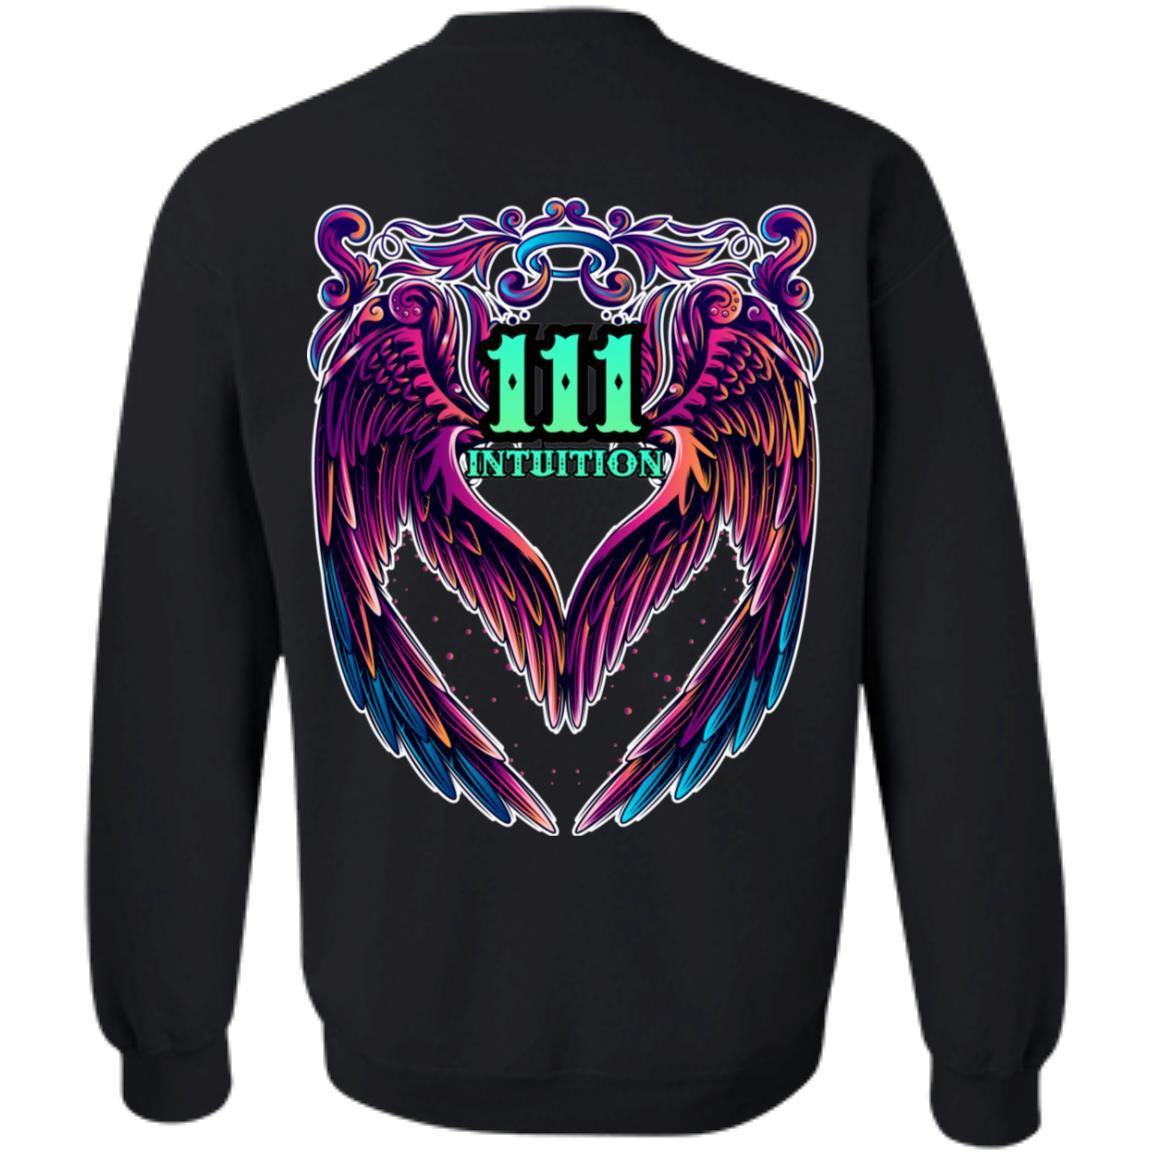 111 ANGEL NUMBER - INTUITION - DESIGN ON BACK - SCORP ZONE LOGO ON FRONT -Z65 Crewneck Pullover Sweatshirt - ScorpZone